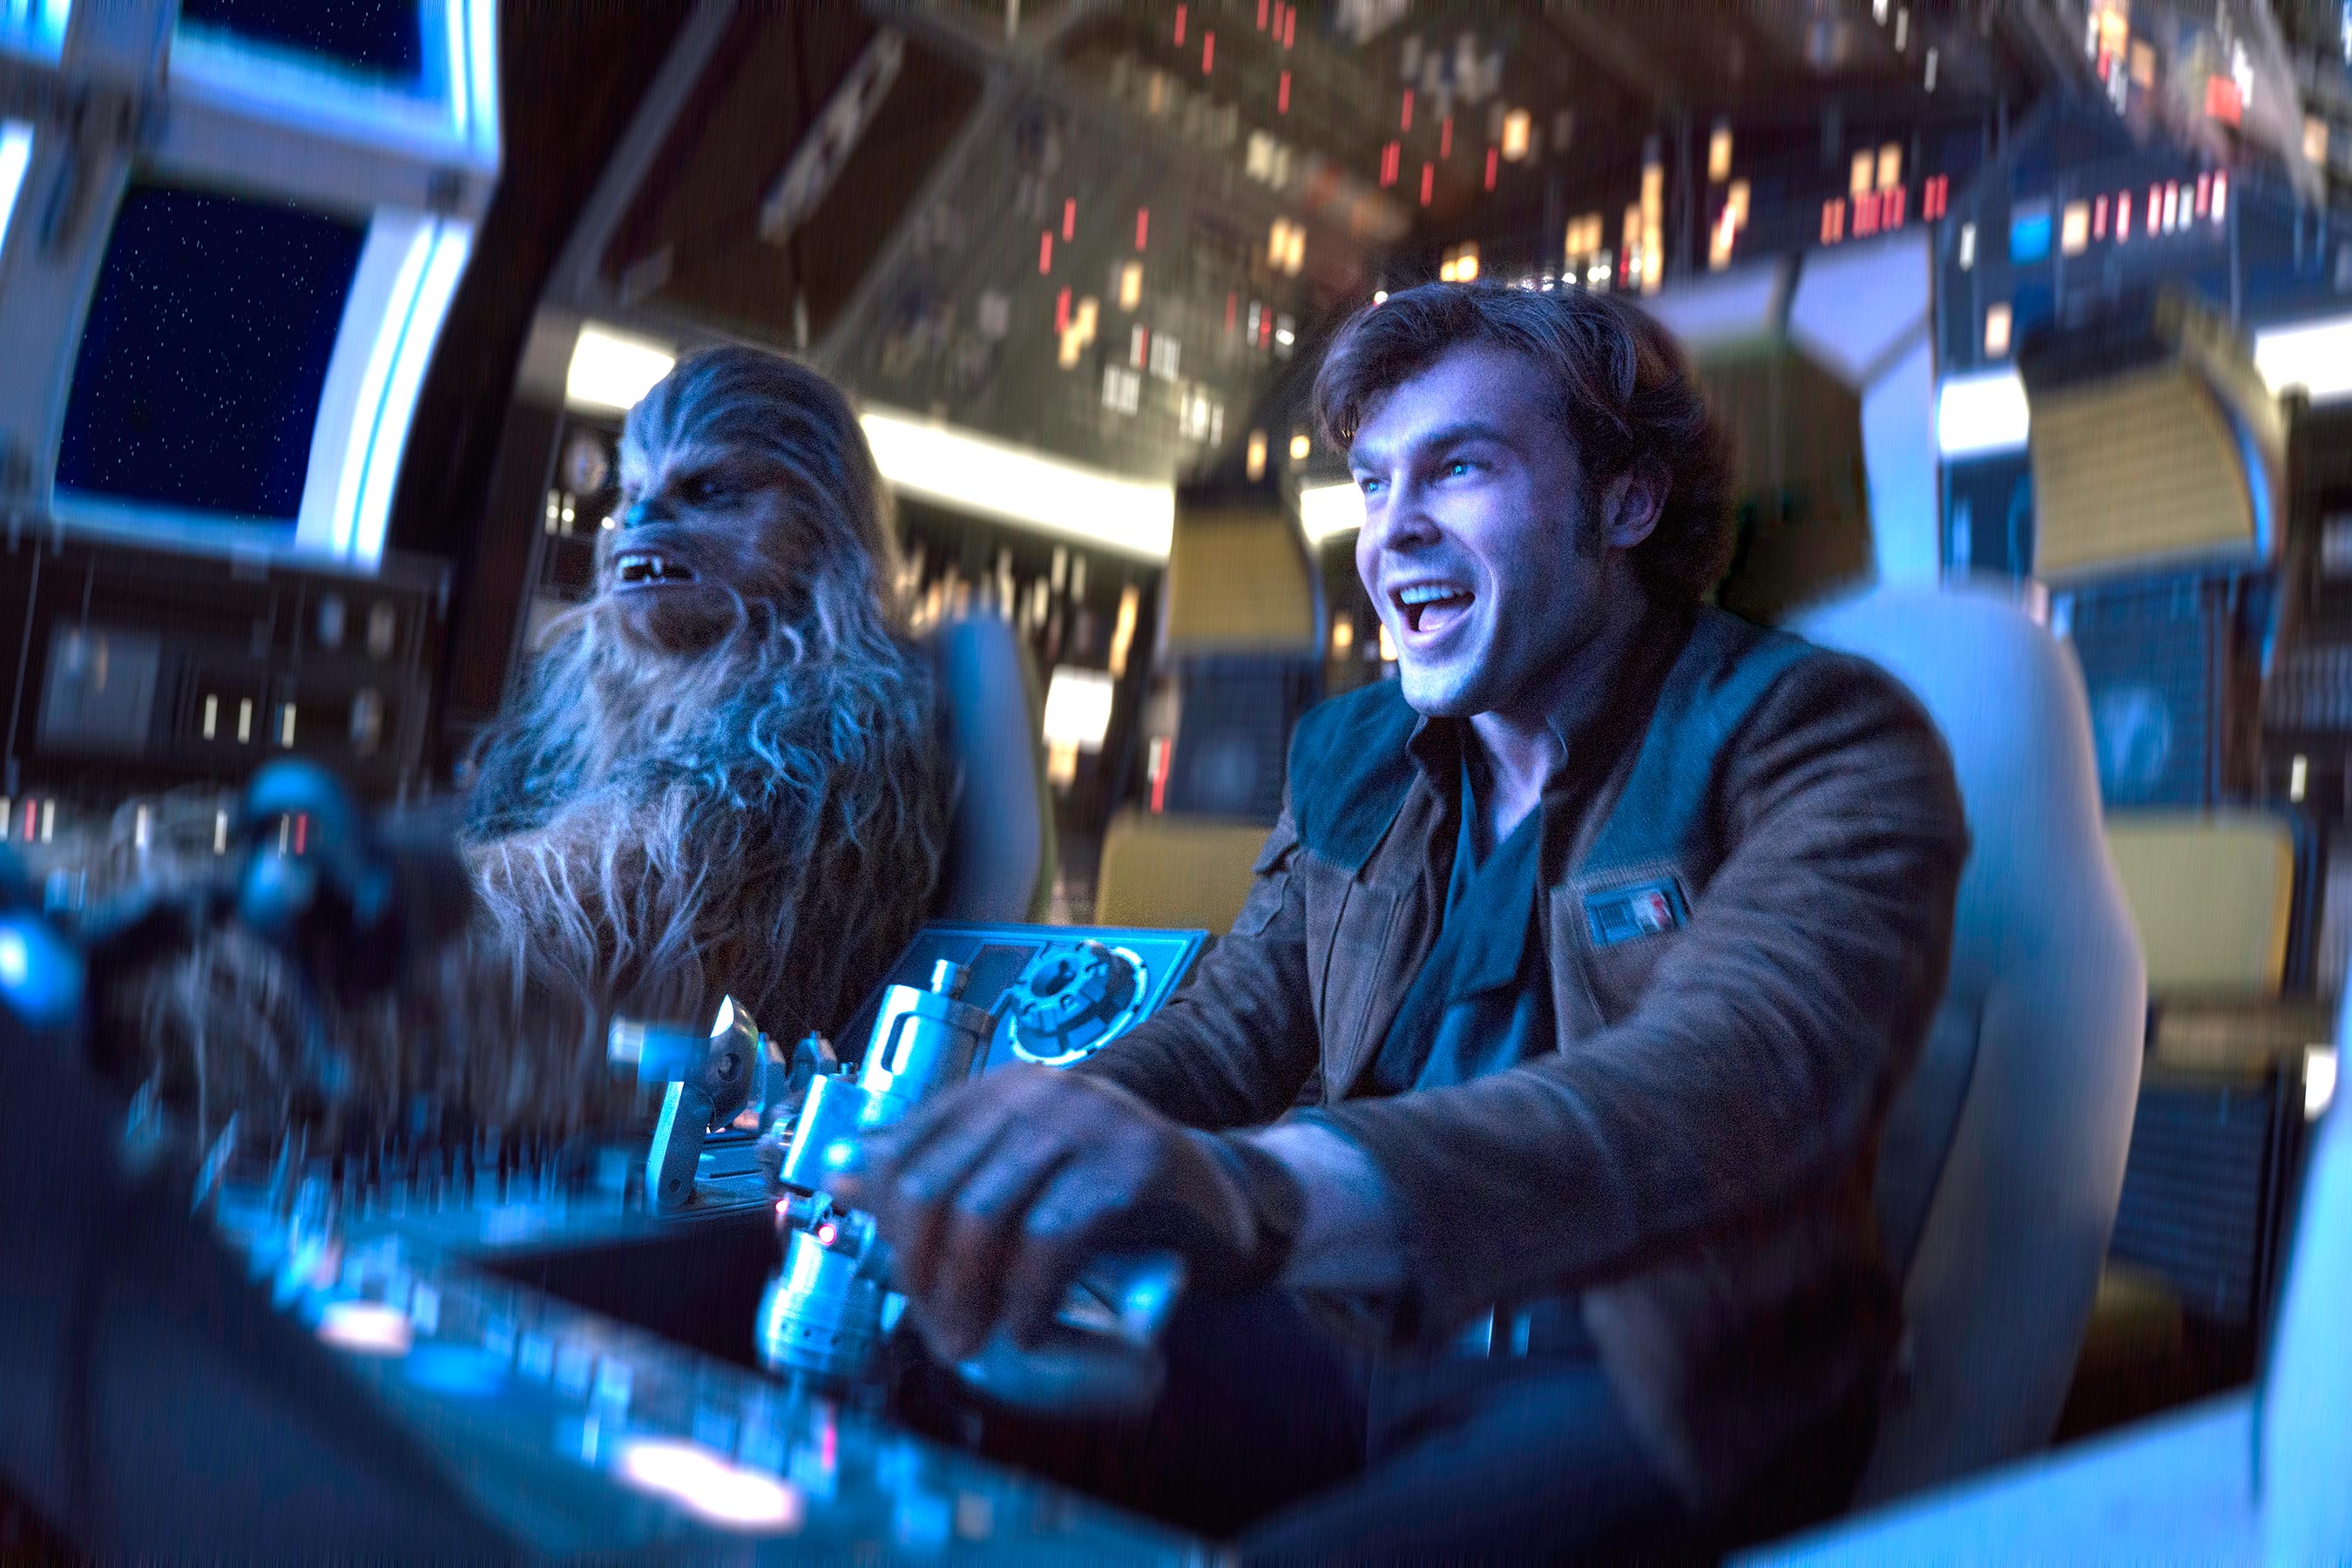 Image result for solo a star wars story